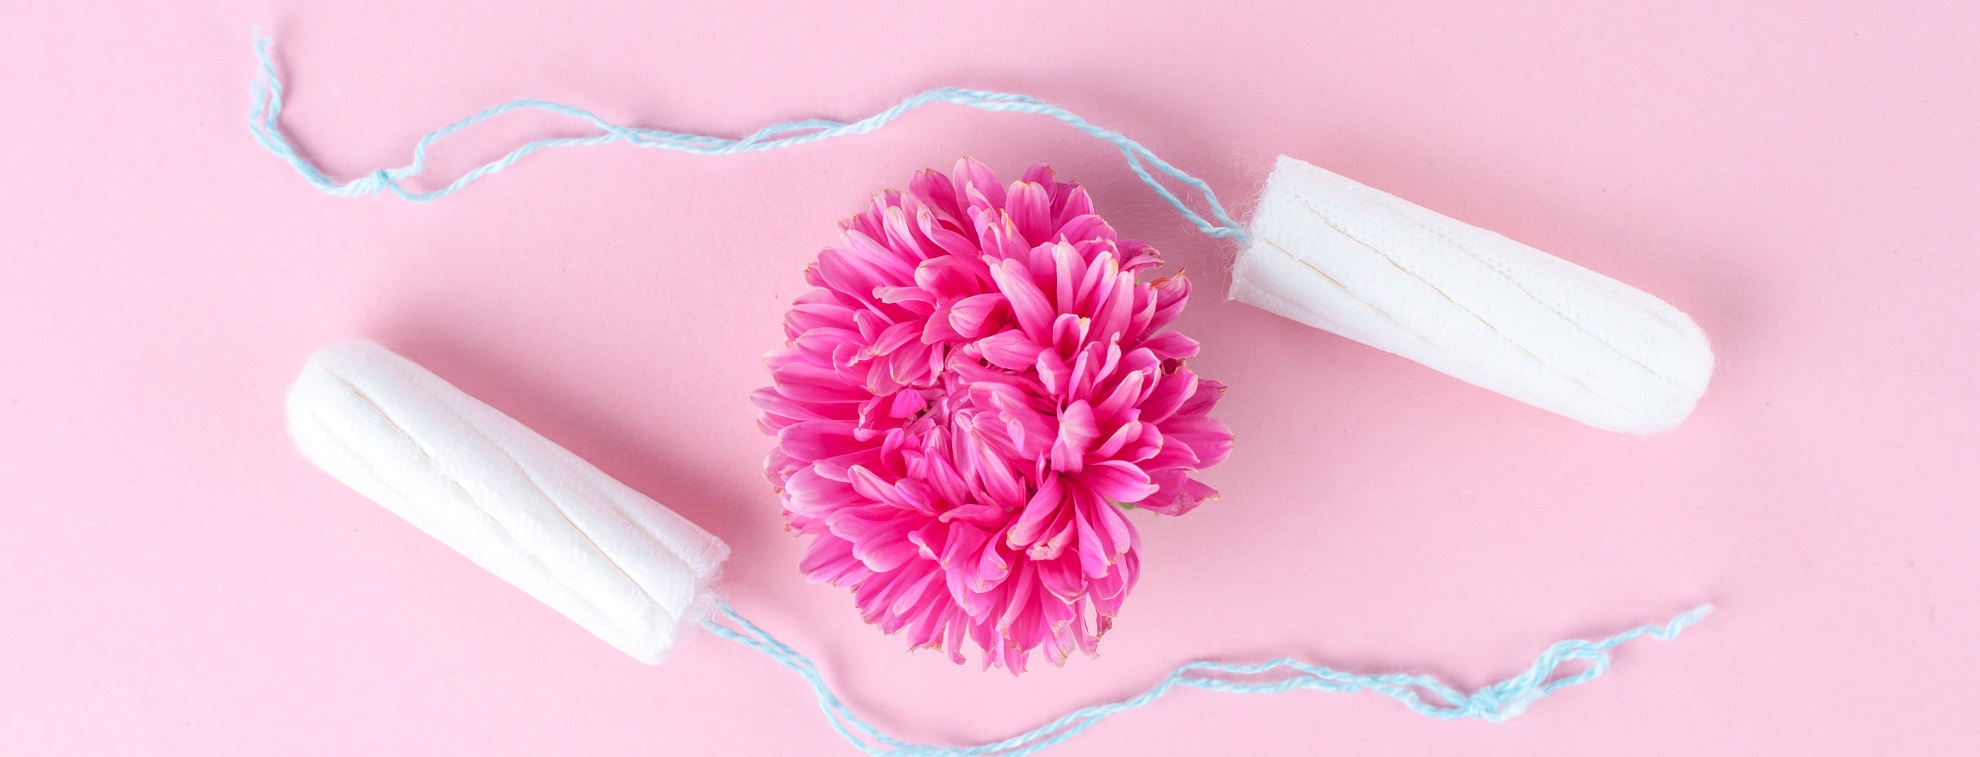 Smash Oriental flute How Old Should You Be to Use Tampons? Tips for First-Timers